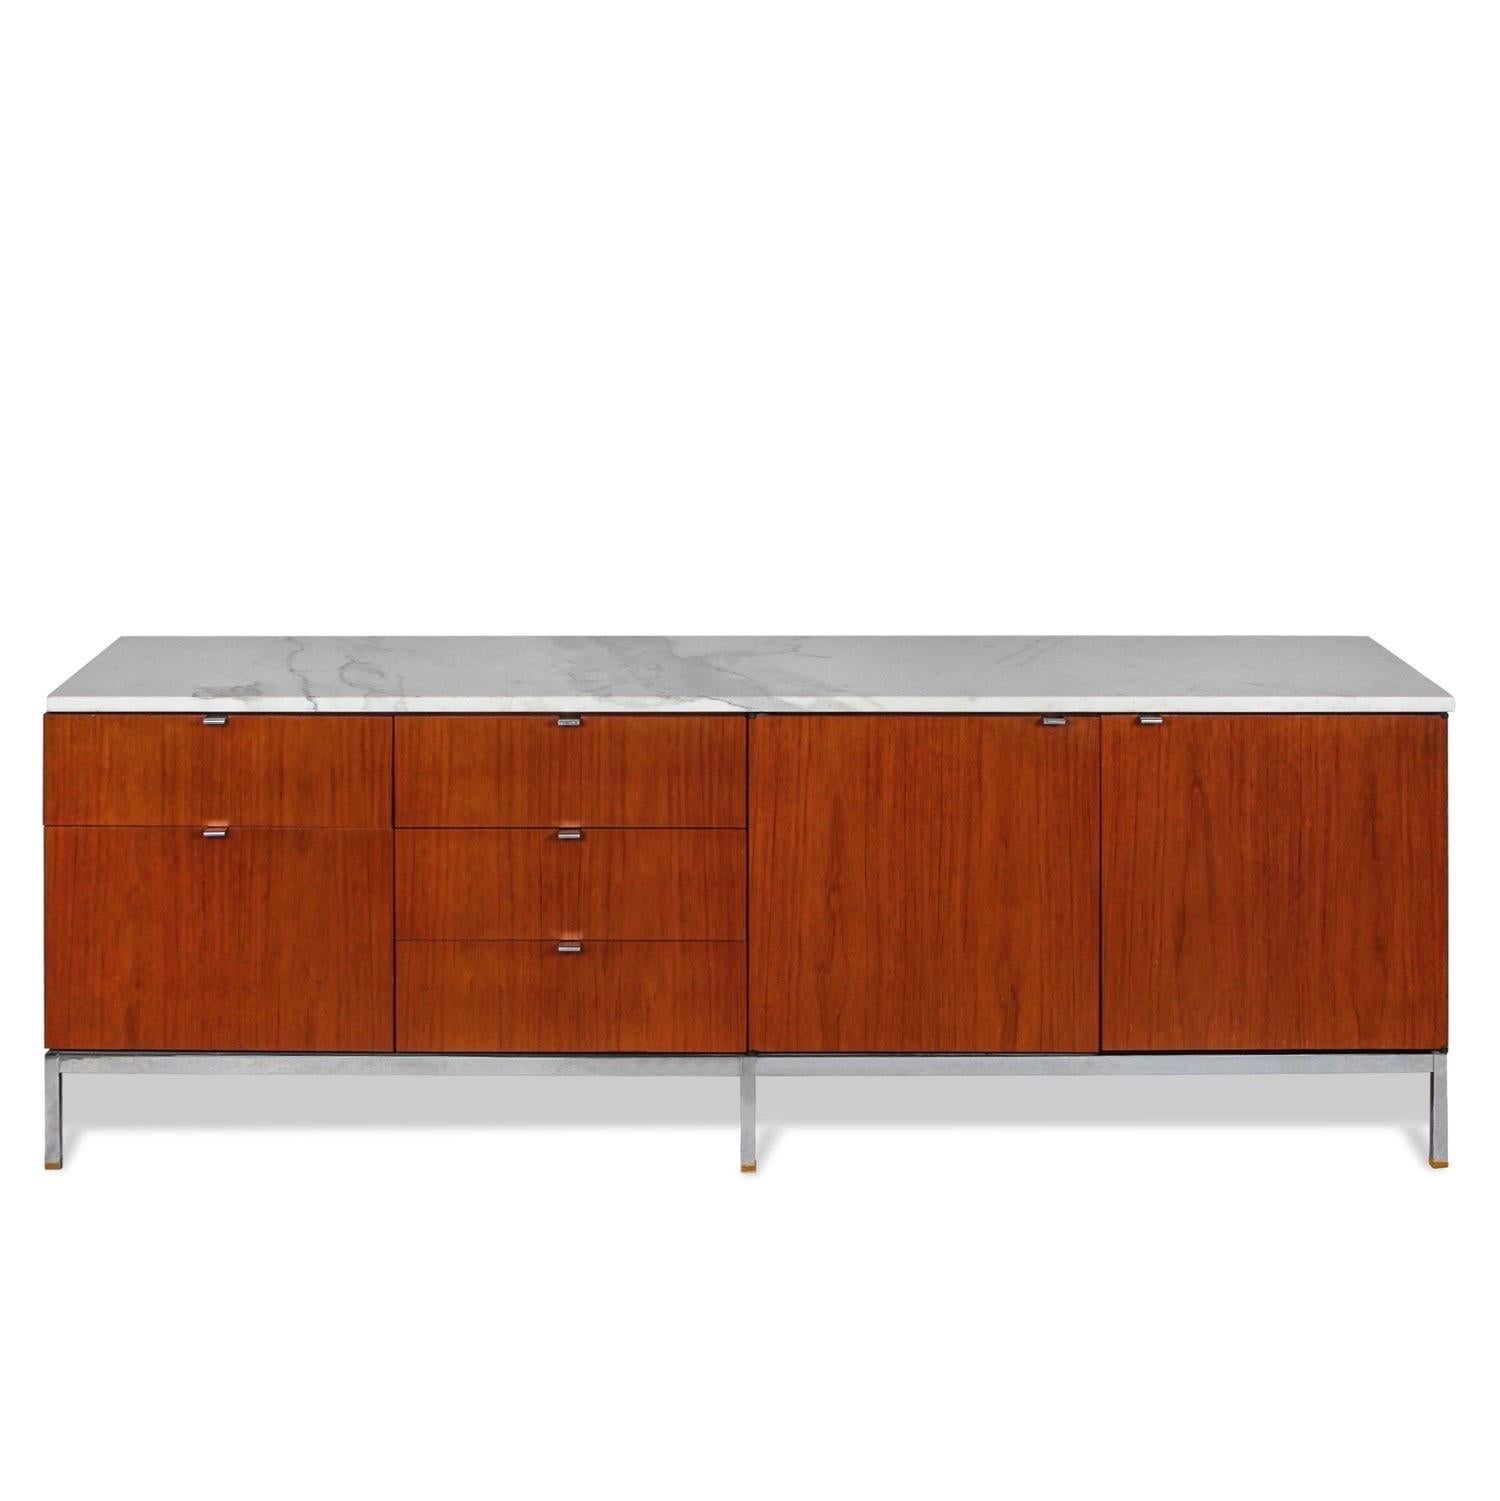 Florence Knoll credenza produced by Knoll Studio. USA, circa 1980.

Features a wood case, stainless steel legs and marble top. Includes drawer and cabinet configuration.

Dimensions: 75.5” L x 18” D x 25.5” H.